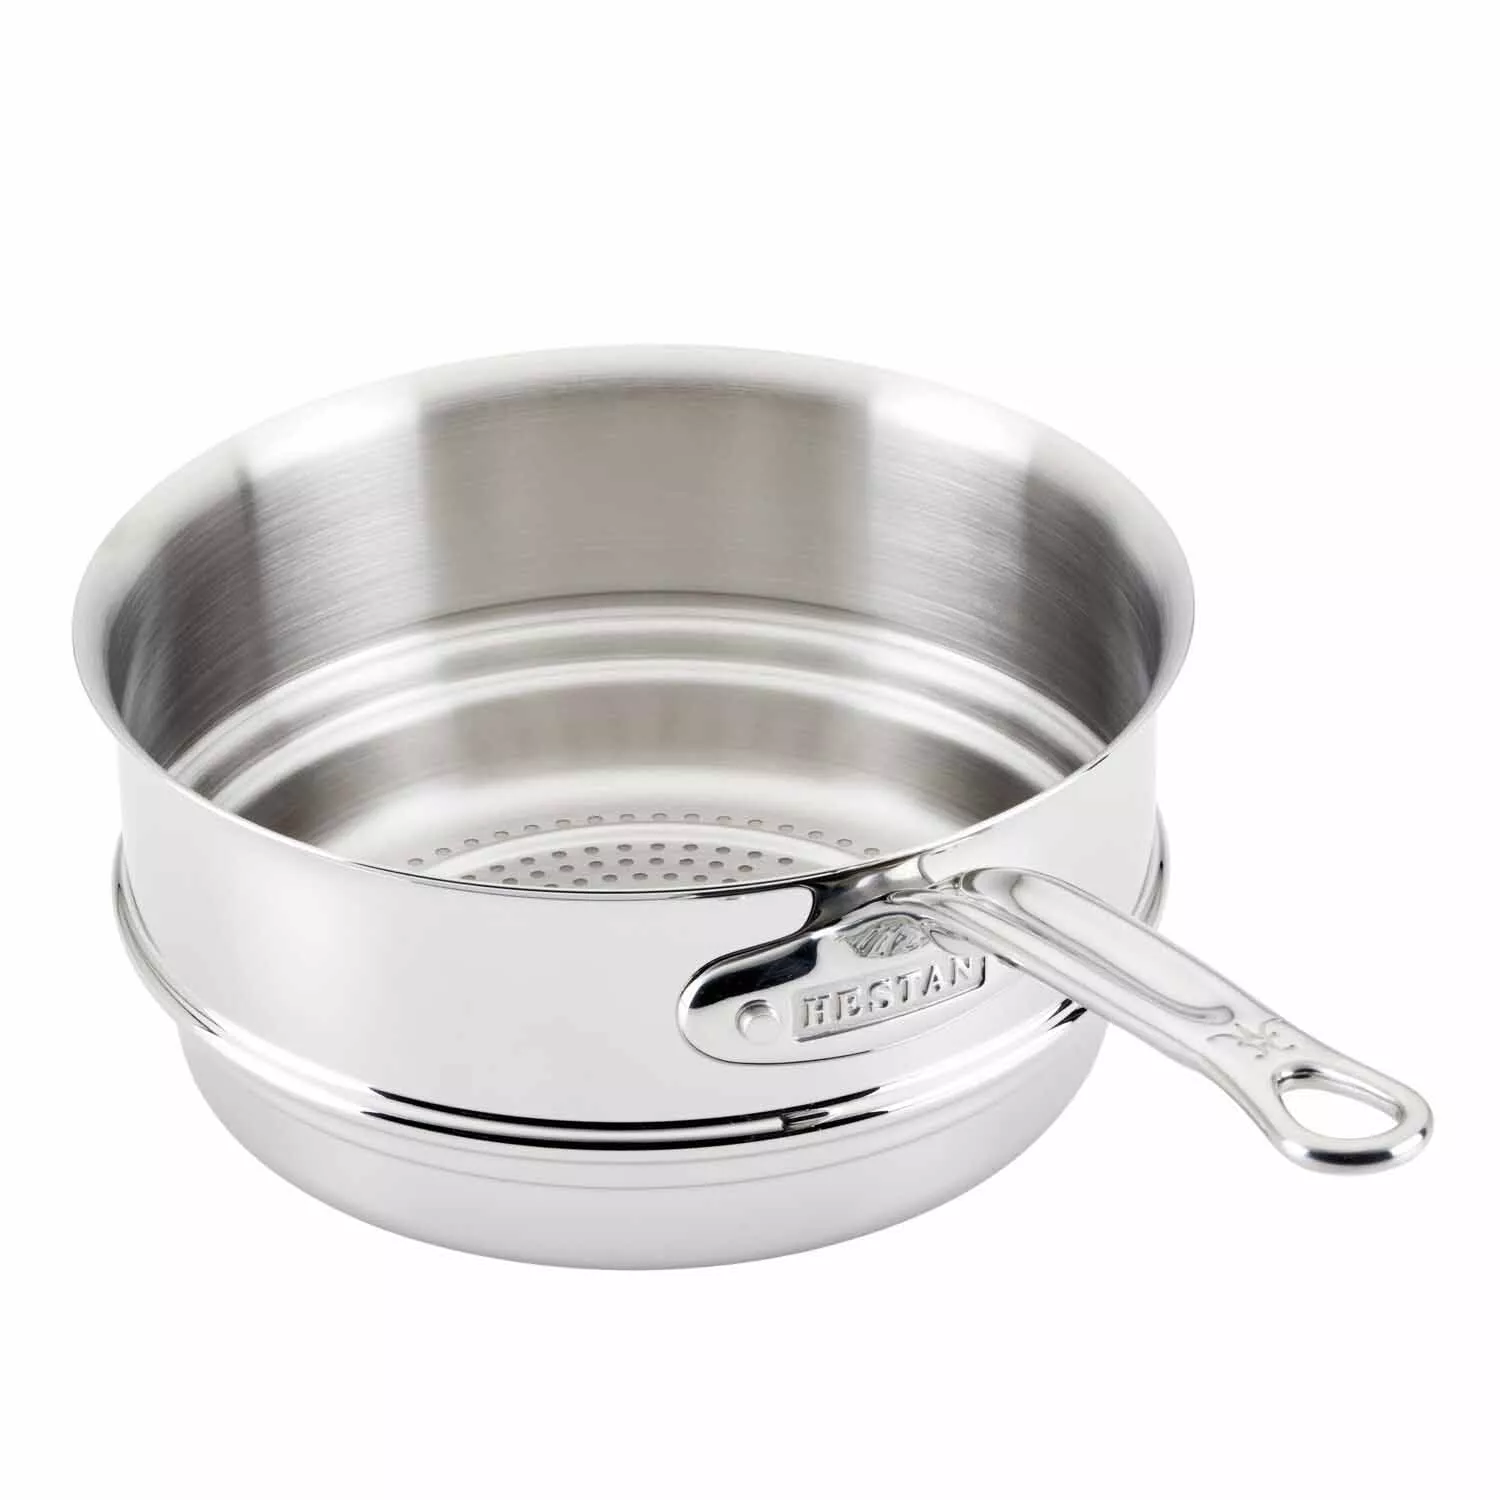 Hestan Provisions Stainless Steel Mixing Bowl, Set of 3